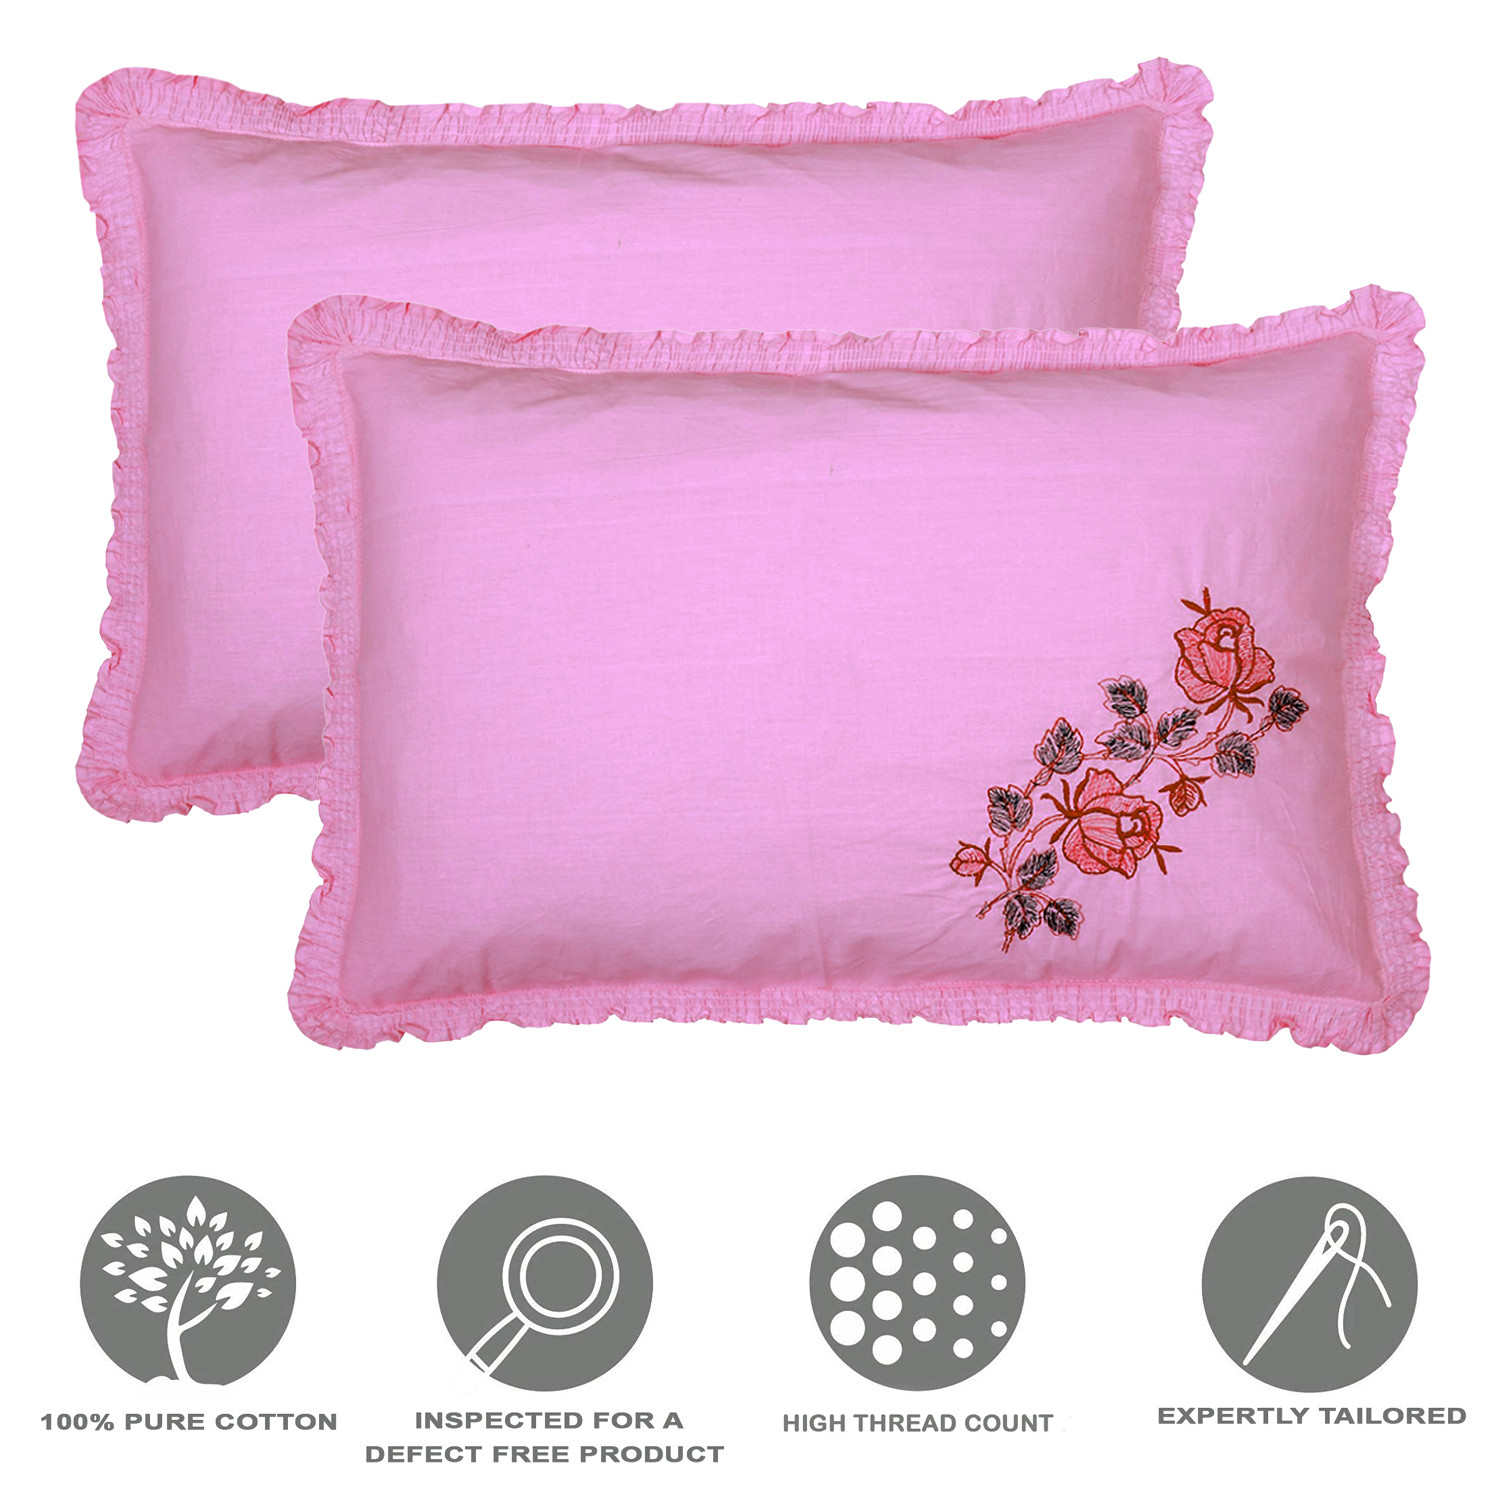 Kuber Industries Embroidery Pattern Breathable & Soft Cotton Pillow Cover For Sofa, Couch, Bed, (Pink) 54KM4119